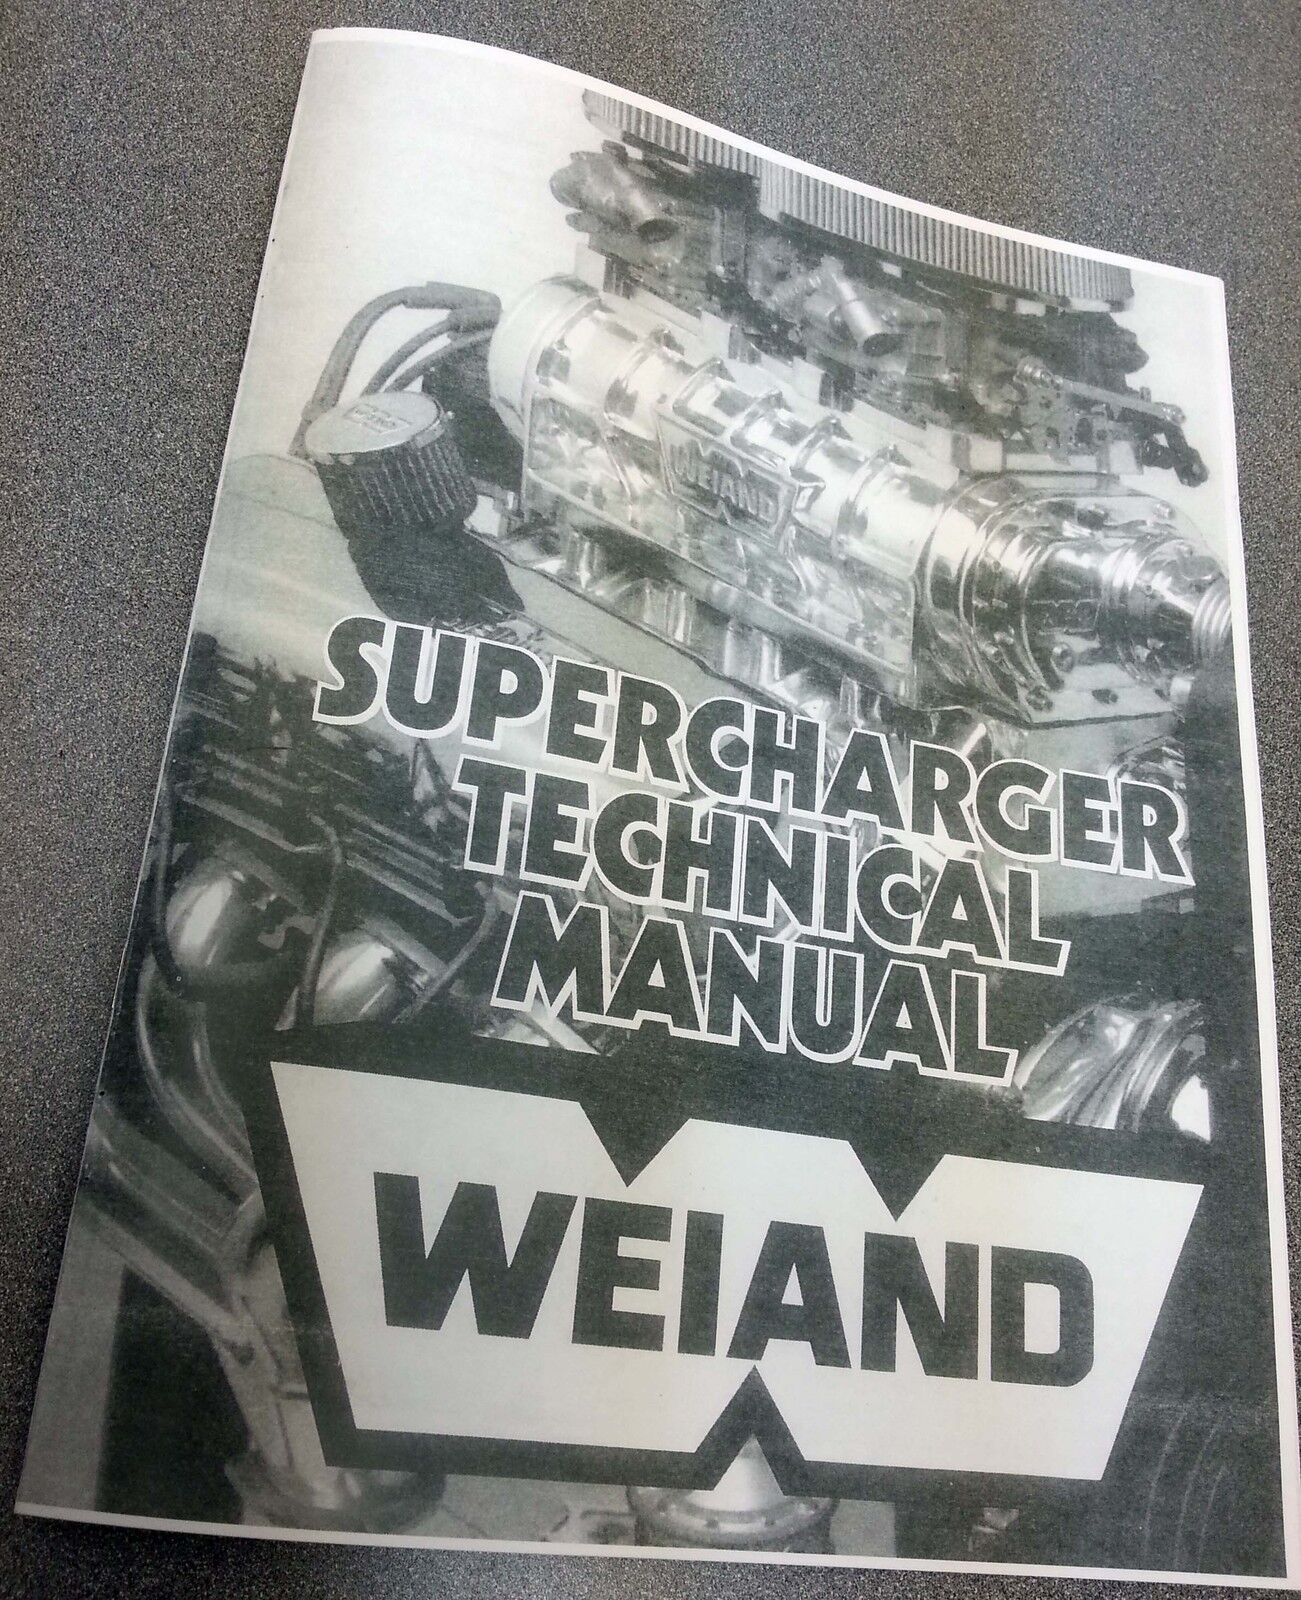 New copy of Weiand 671 blower supercharger basics tech manual with illustrations